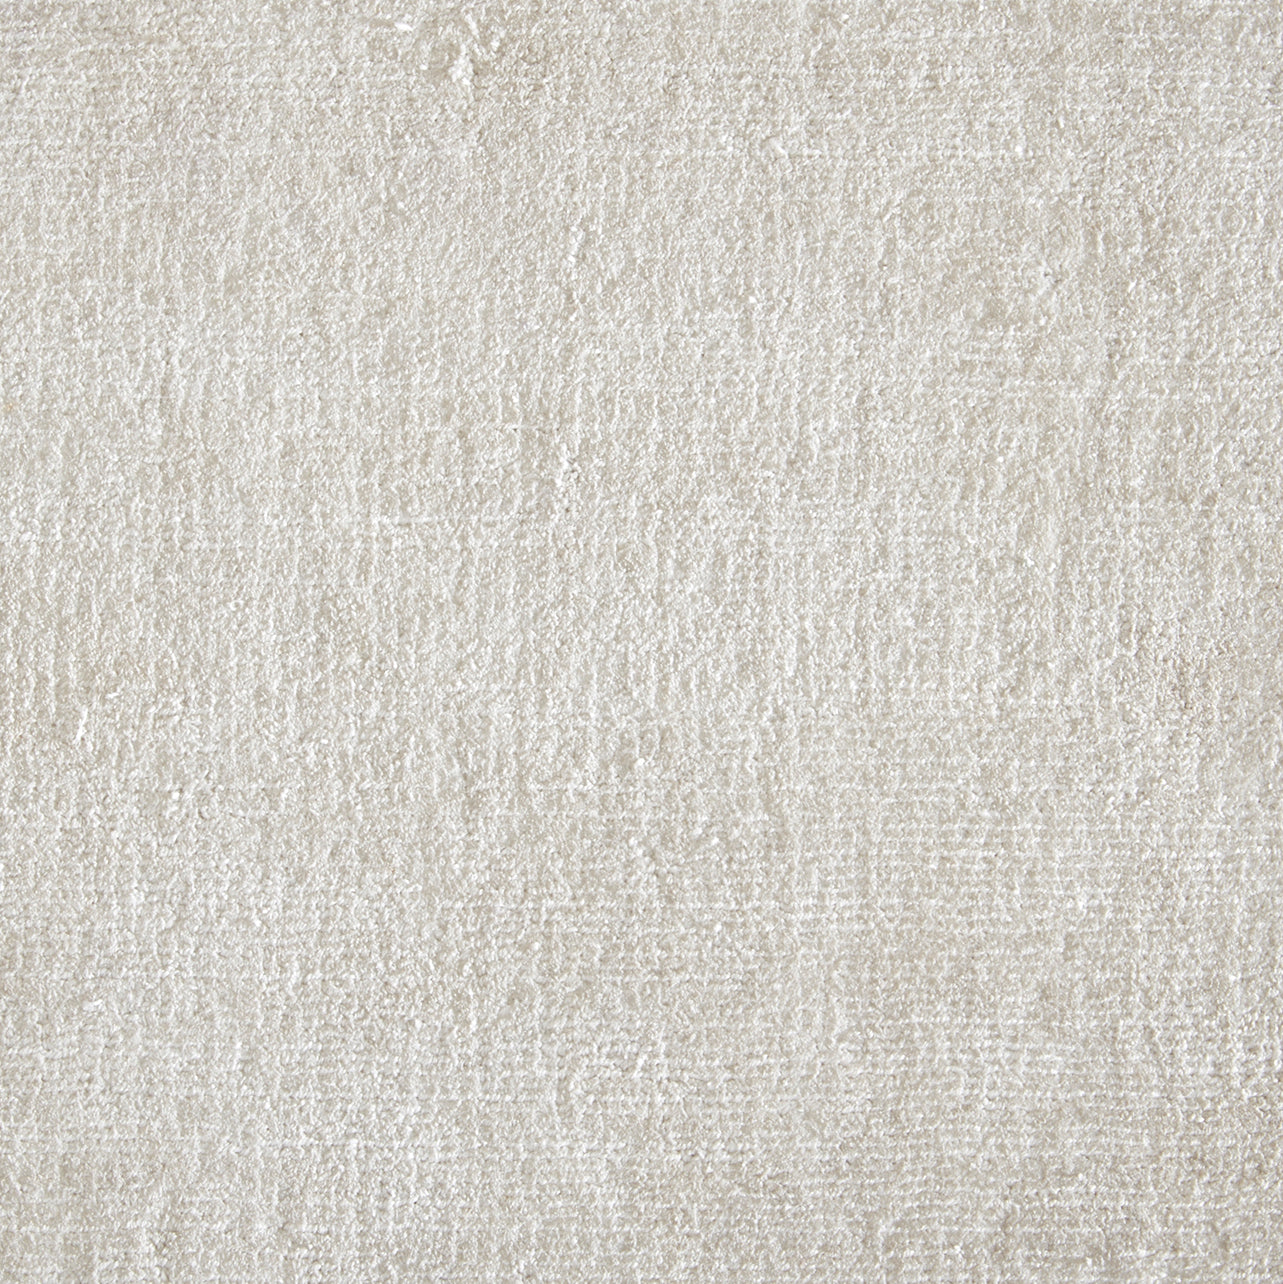 Poly-silk high pile broadloom carpet swatch in a shiny alabaster colorway.